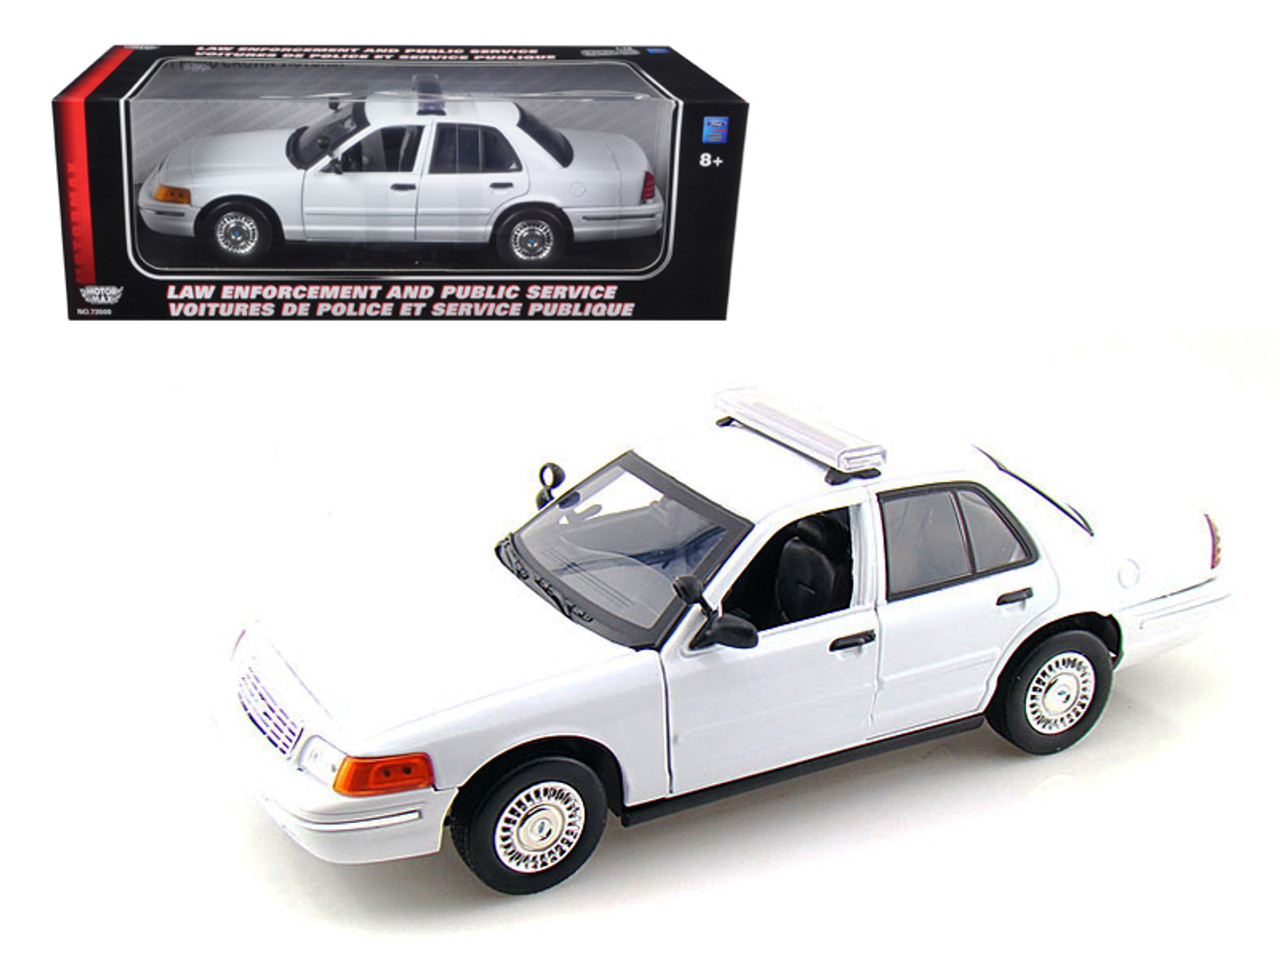 2001 Ford Crown Victoria Unmarked White Police Car 1/18 Diecast Model Car by Motormax